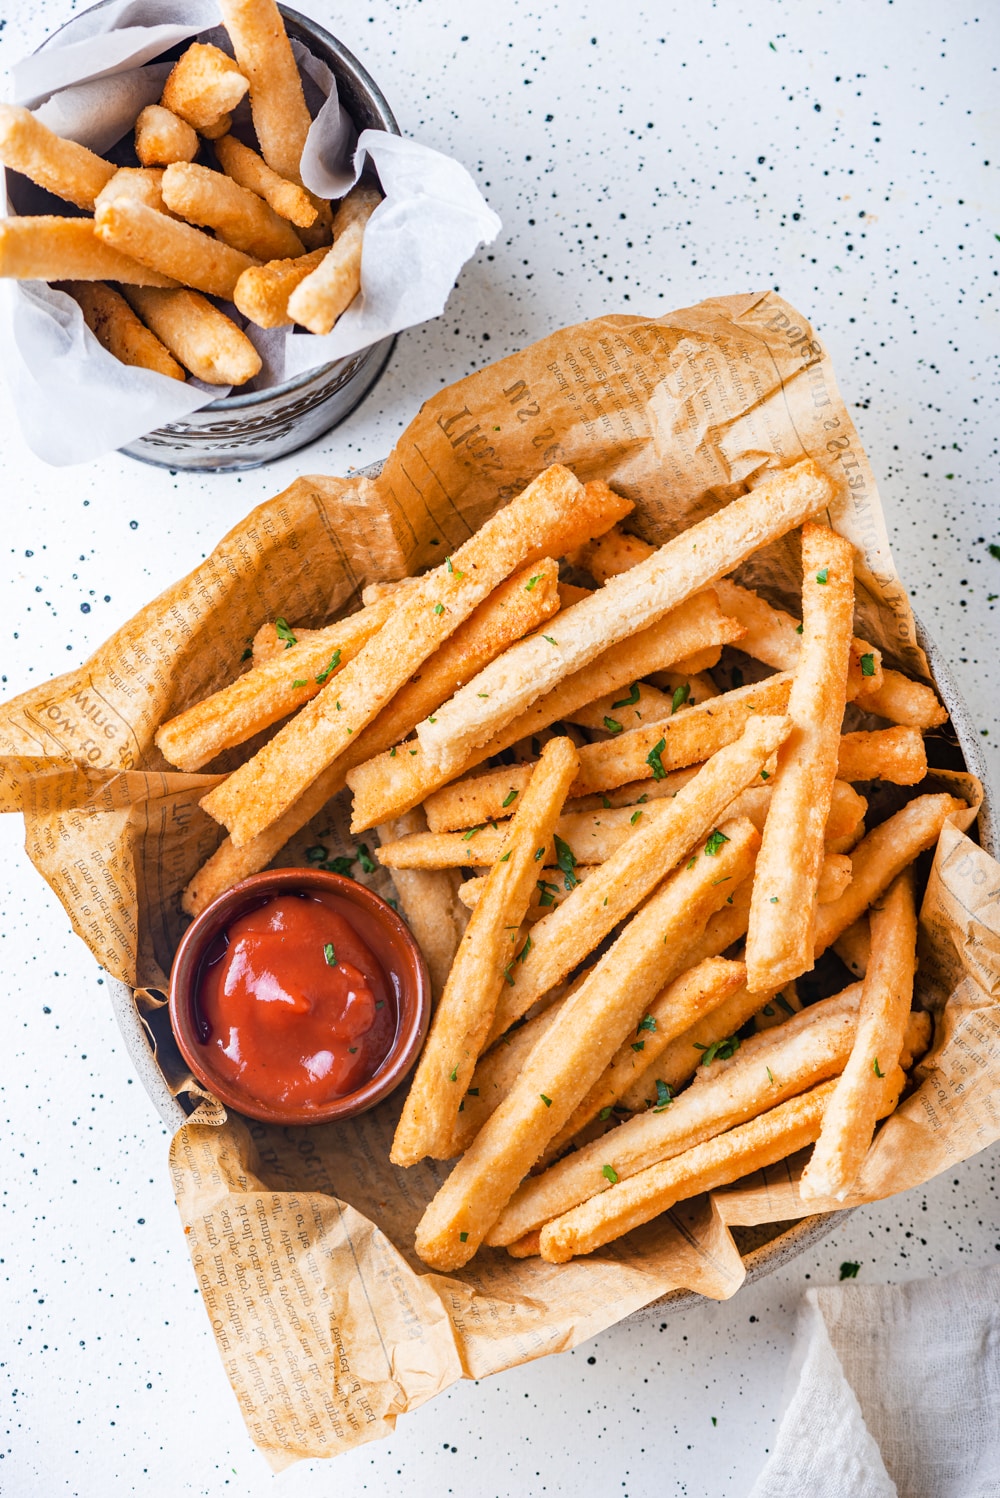 An overhead view of a basket lined with brown newspaper and filled with keto french fries. There is a small cup of ketchup placed in the left of the basket. A metal cup filled with parchment paper and keto french fries on top is behind the basket. The basket and cup are on a white table.